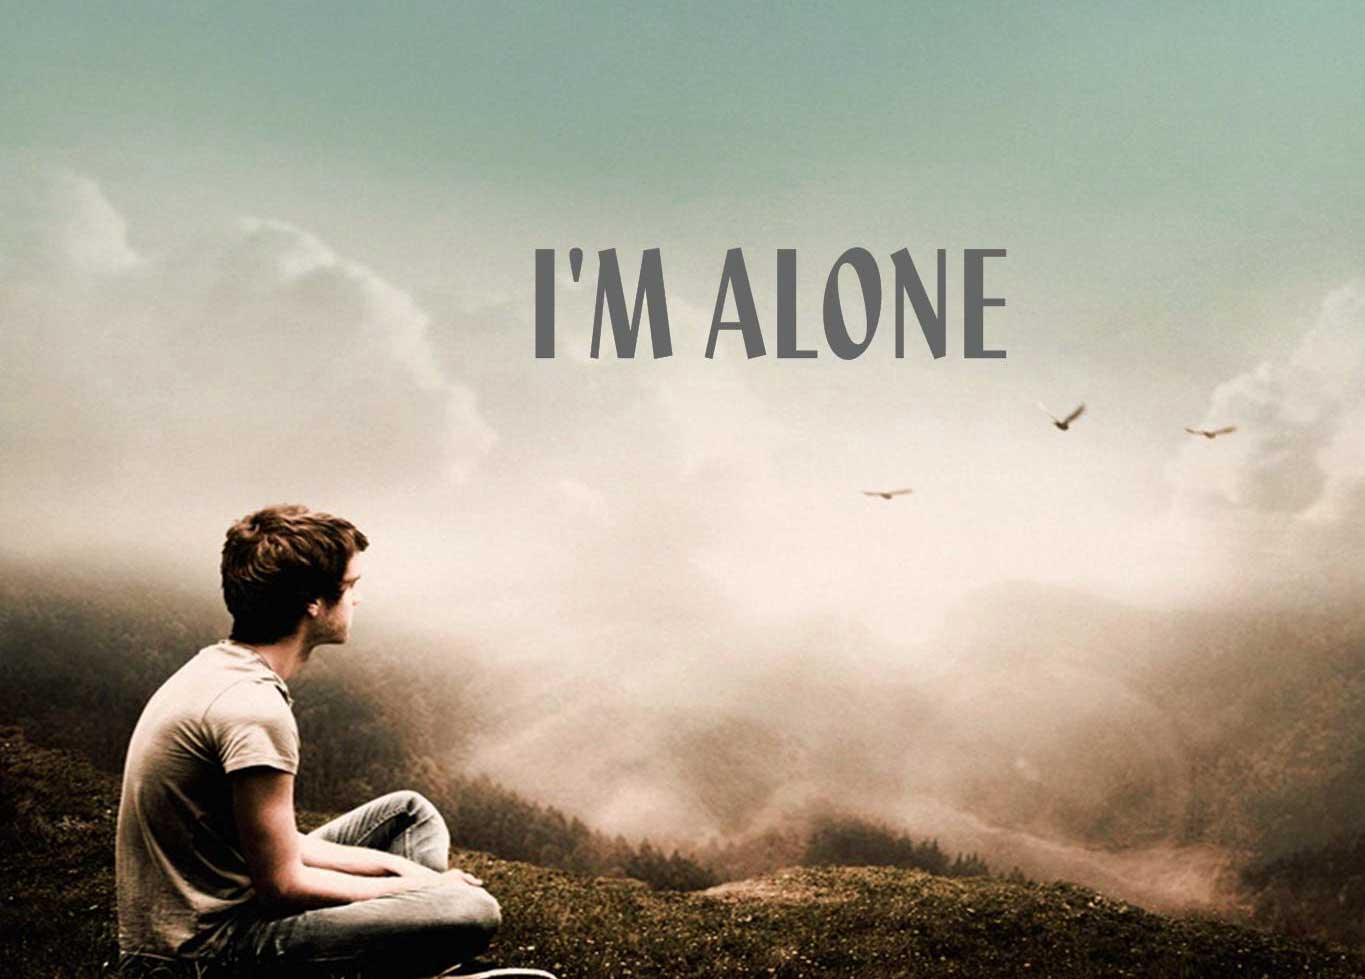 I am alone hd wallpapers